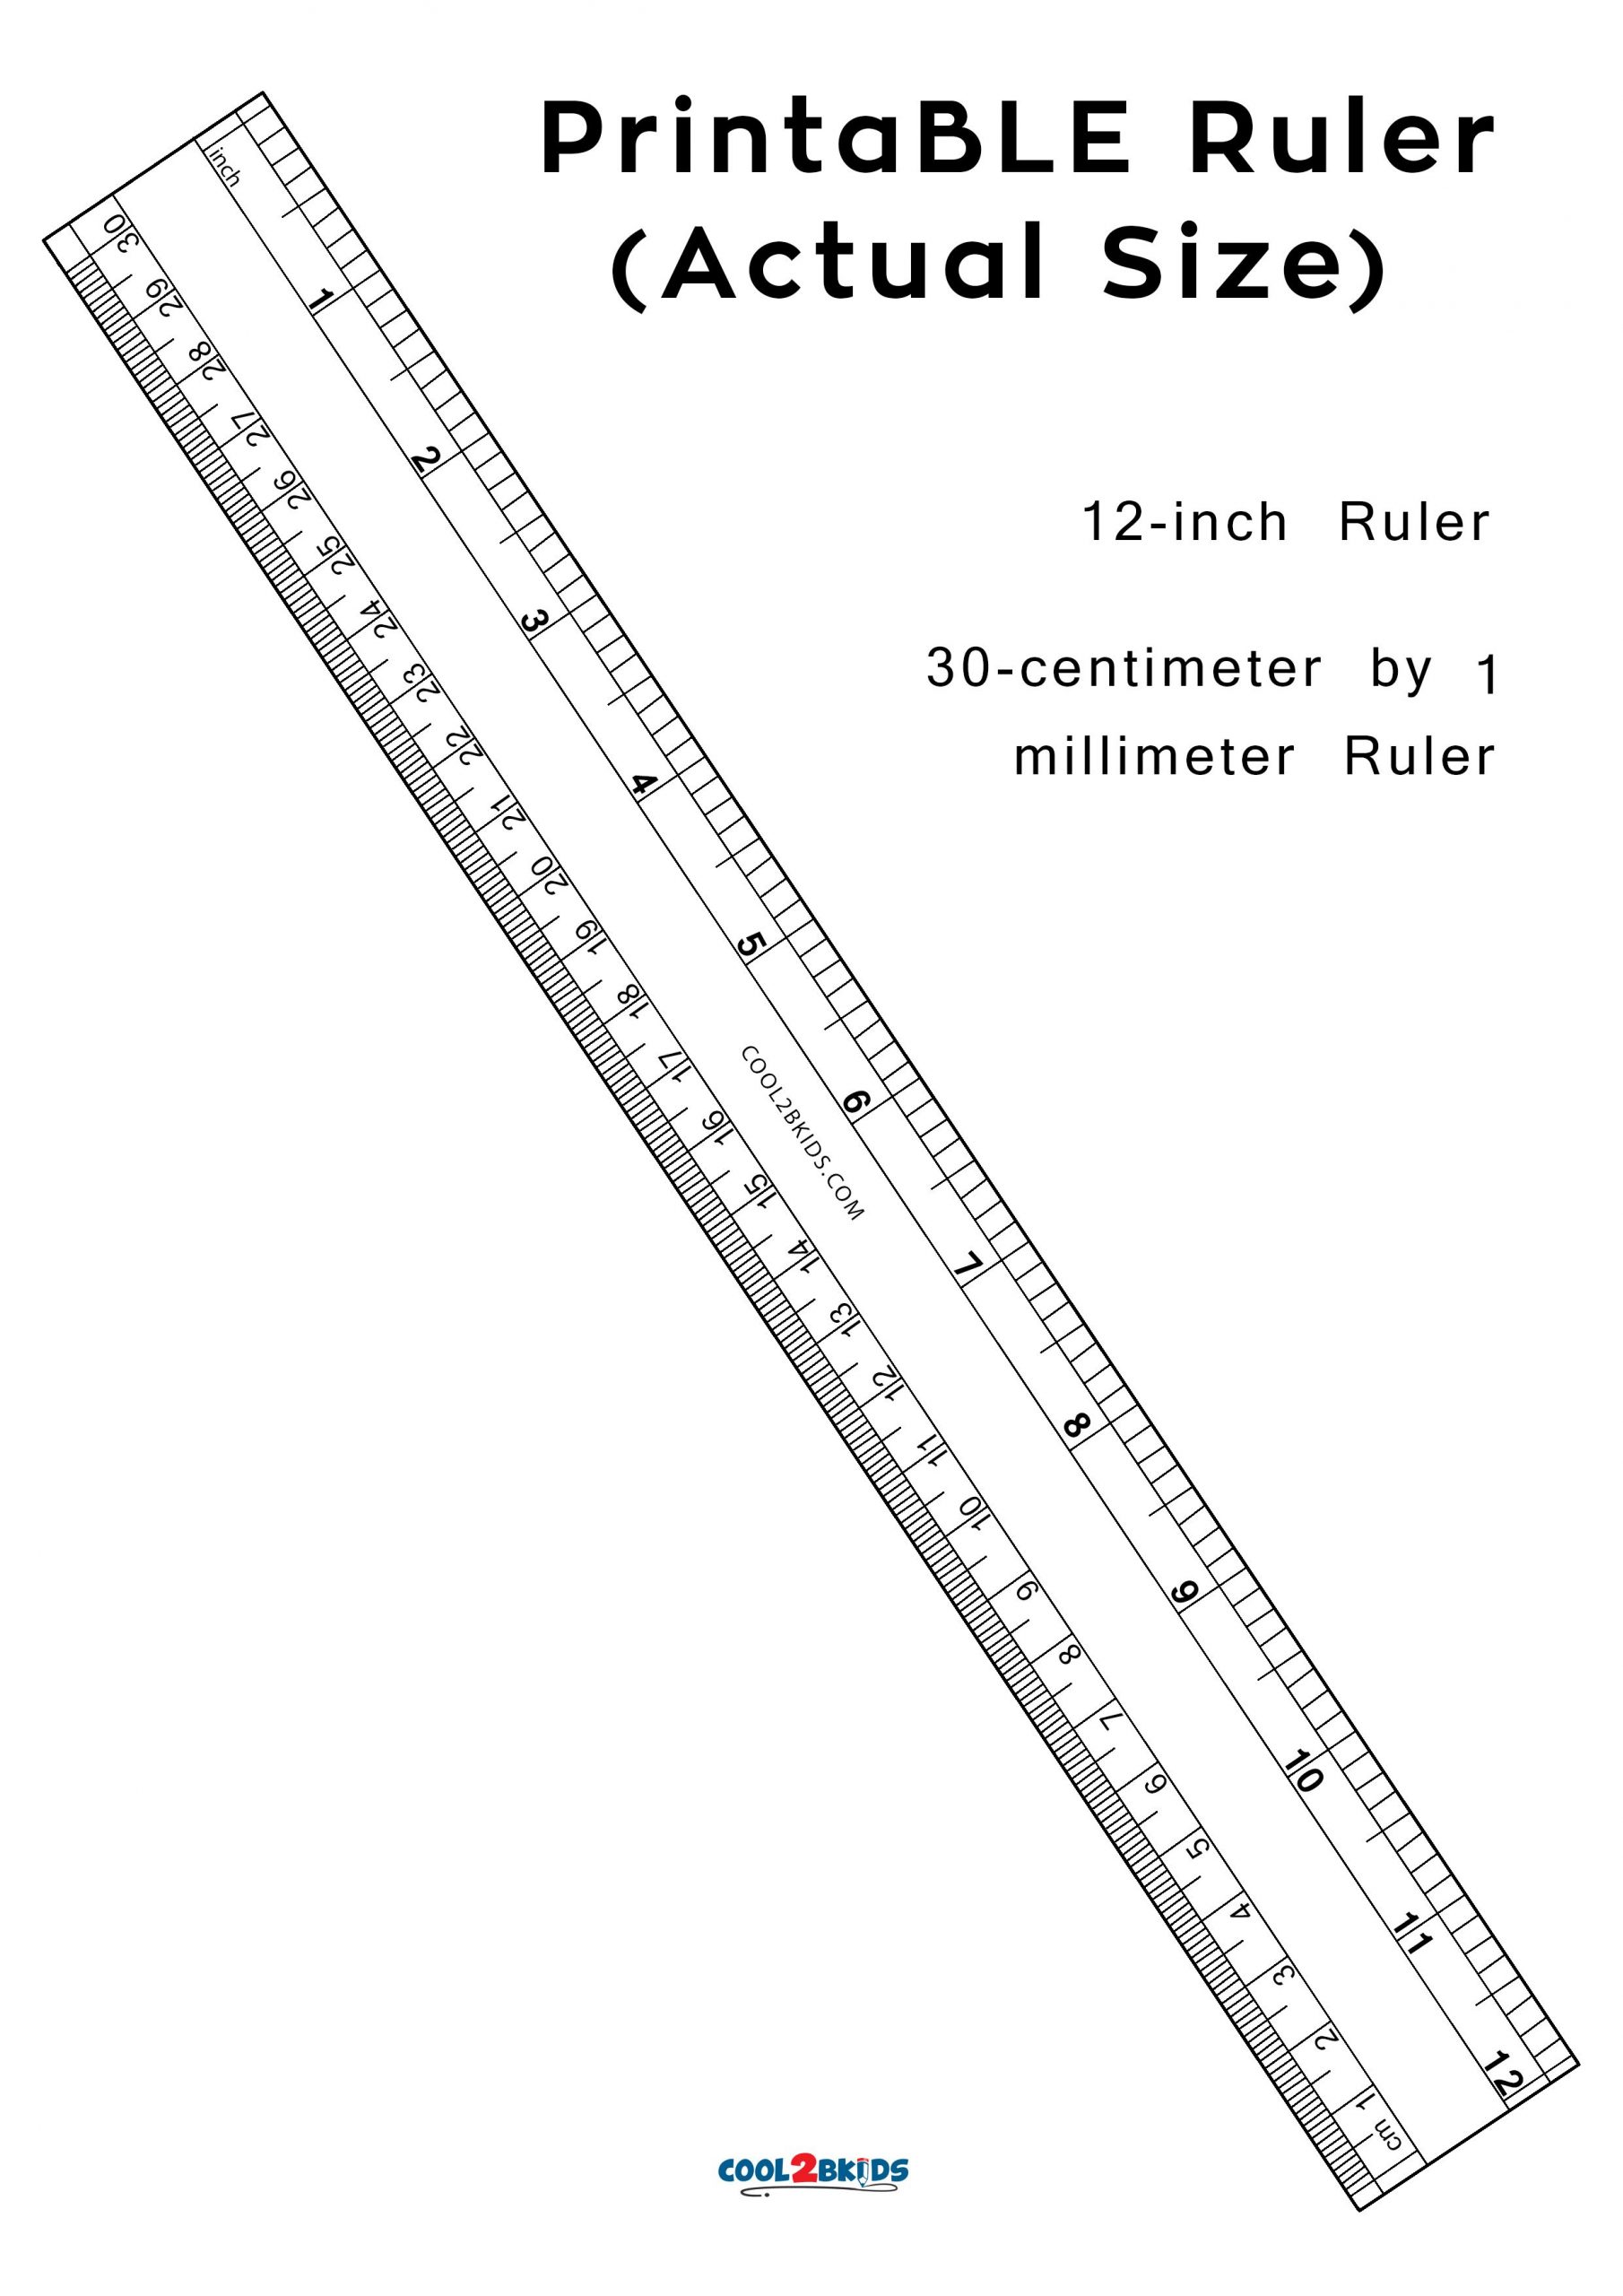 Printable 12-Inch Ruler For Actual Size Measurements (2020